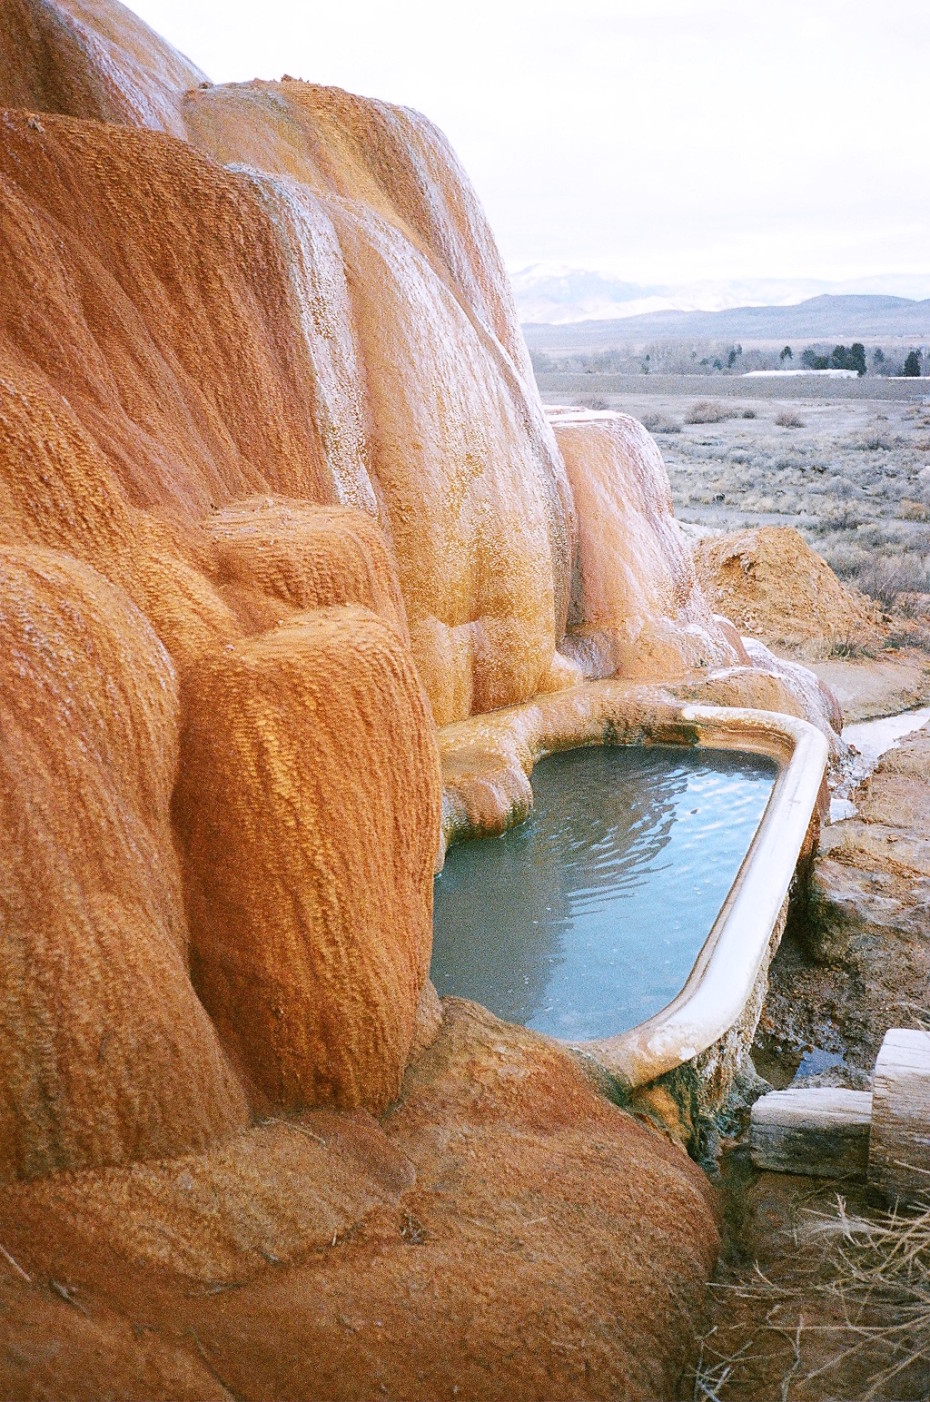 Soaking in the Desert Bath Tubs of a Pioneer's Hot Spring